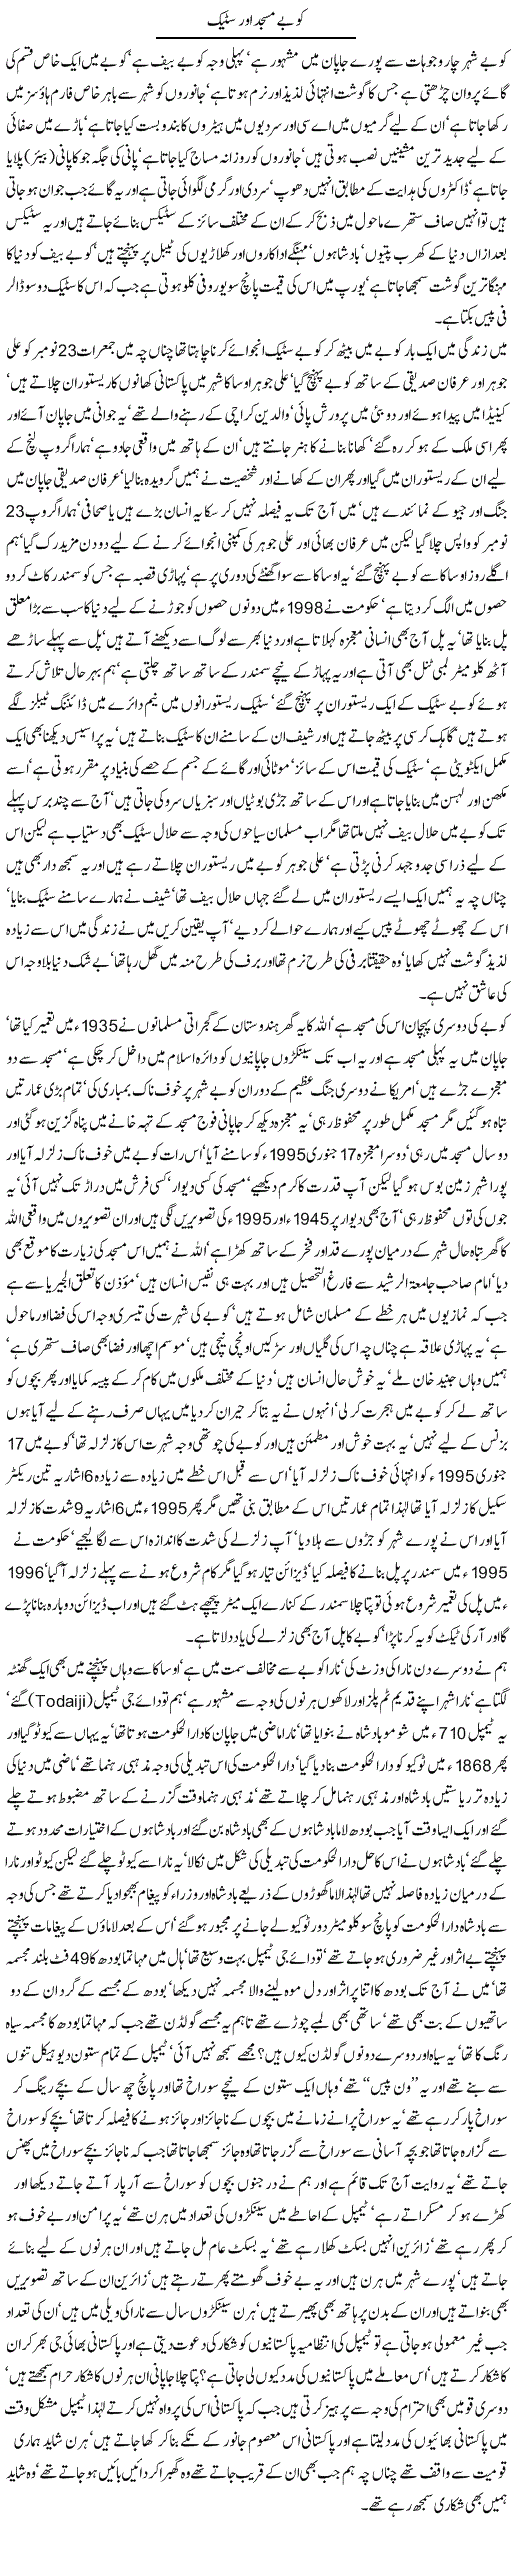 Javed Chaudhry Column About Japan Kobe Mosque & Beef Steak